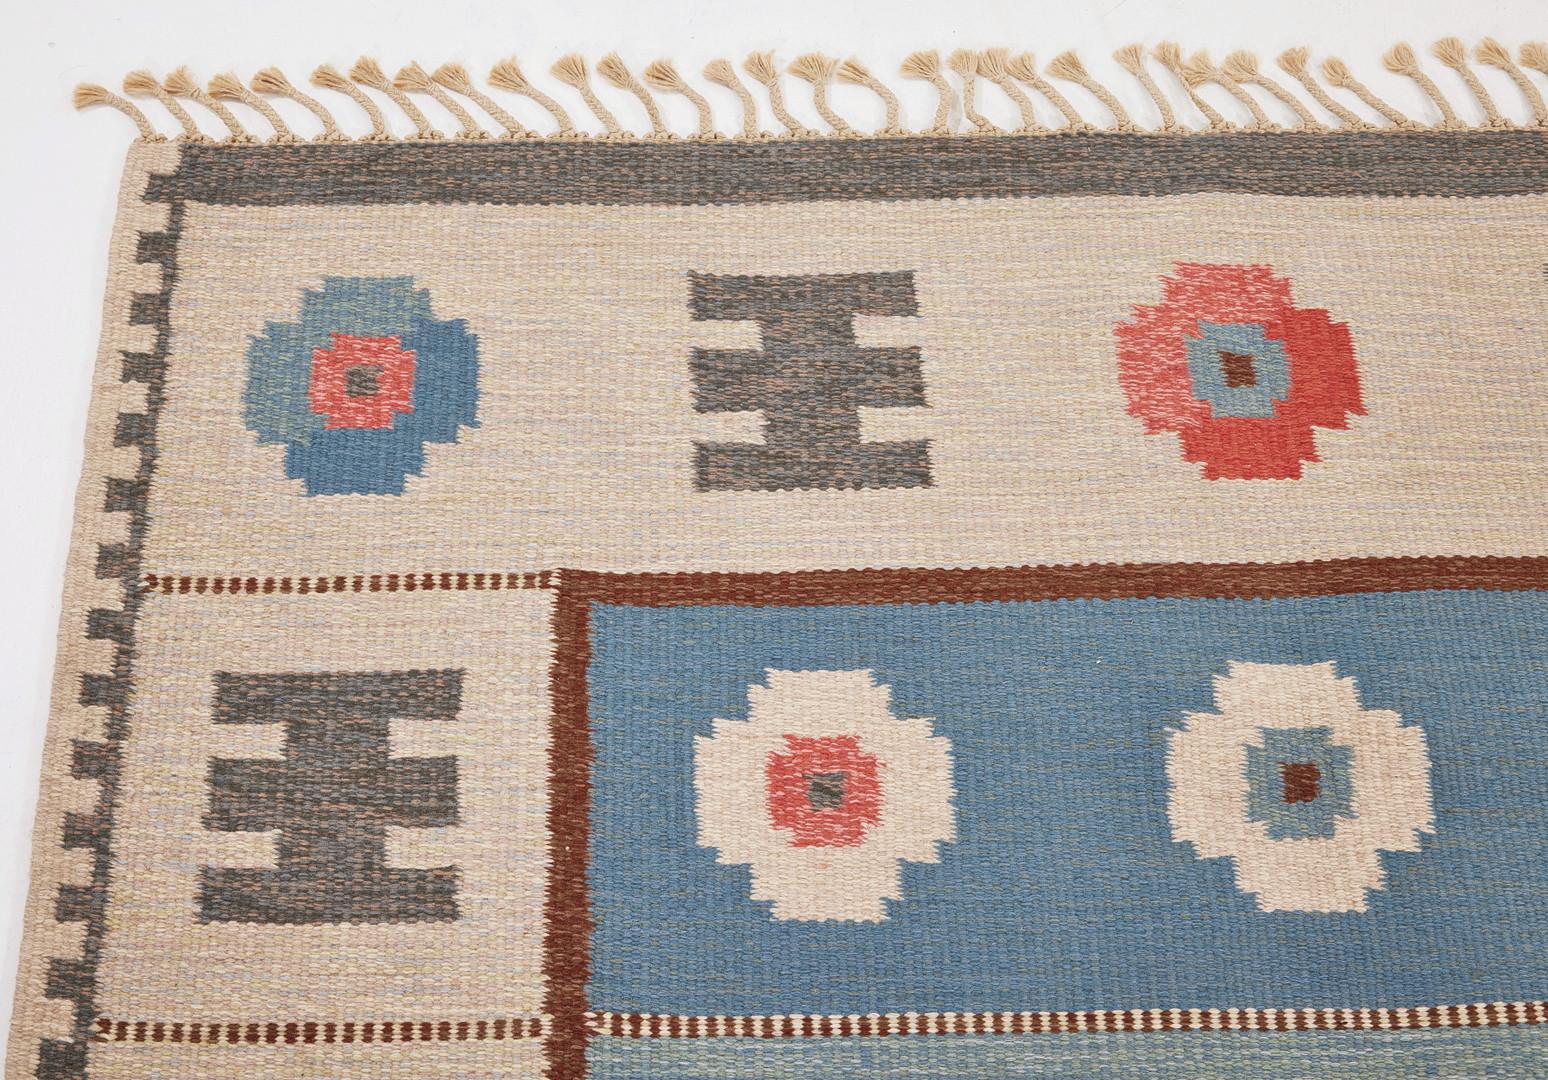 A vintage Swedish flat-weave wool rug by Alice Walleback dating back to 1960s with woven initials (AW) at a lower corner. Size: 6.5